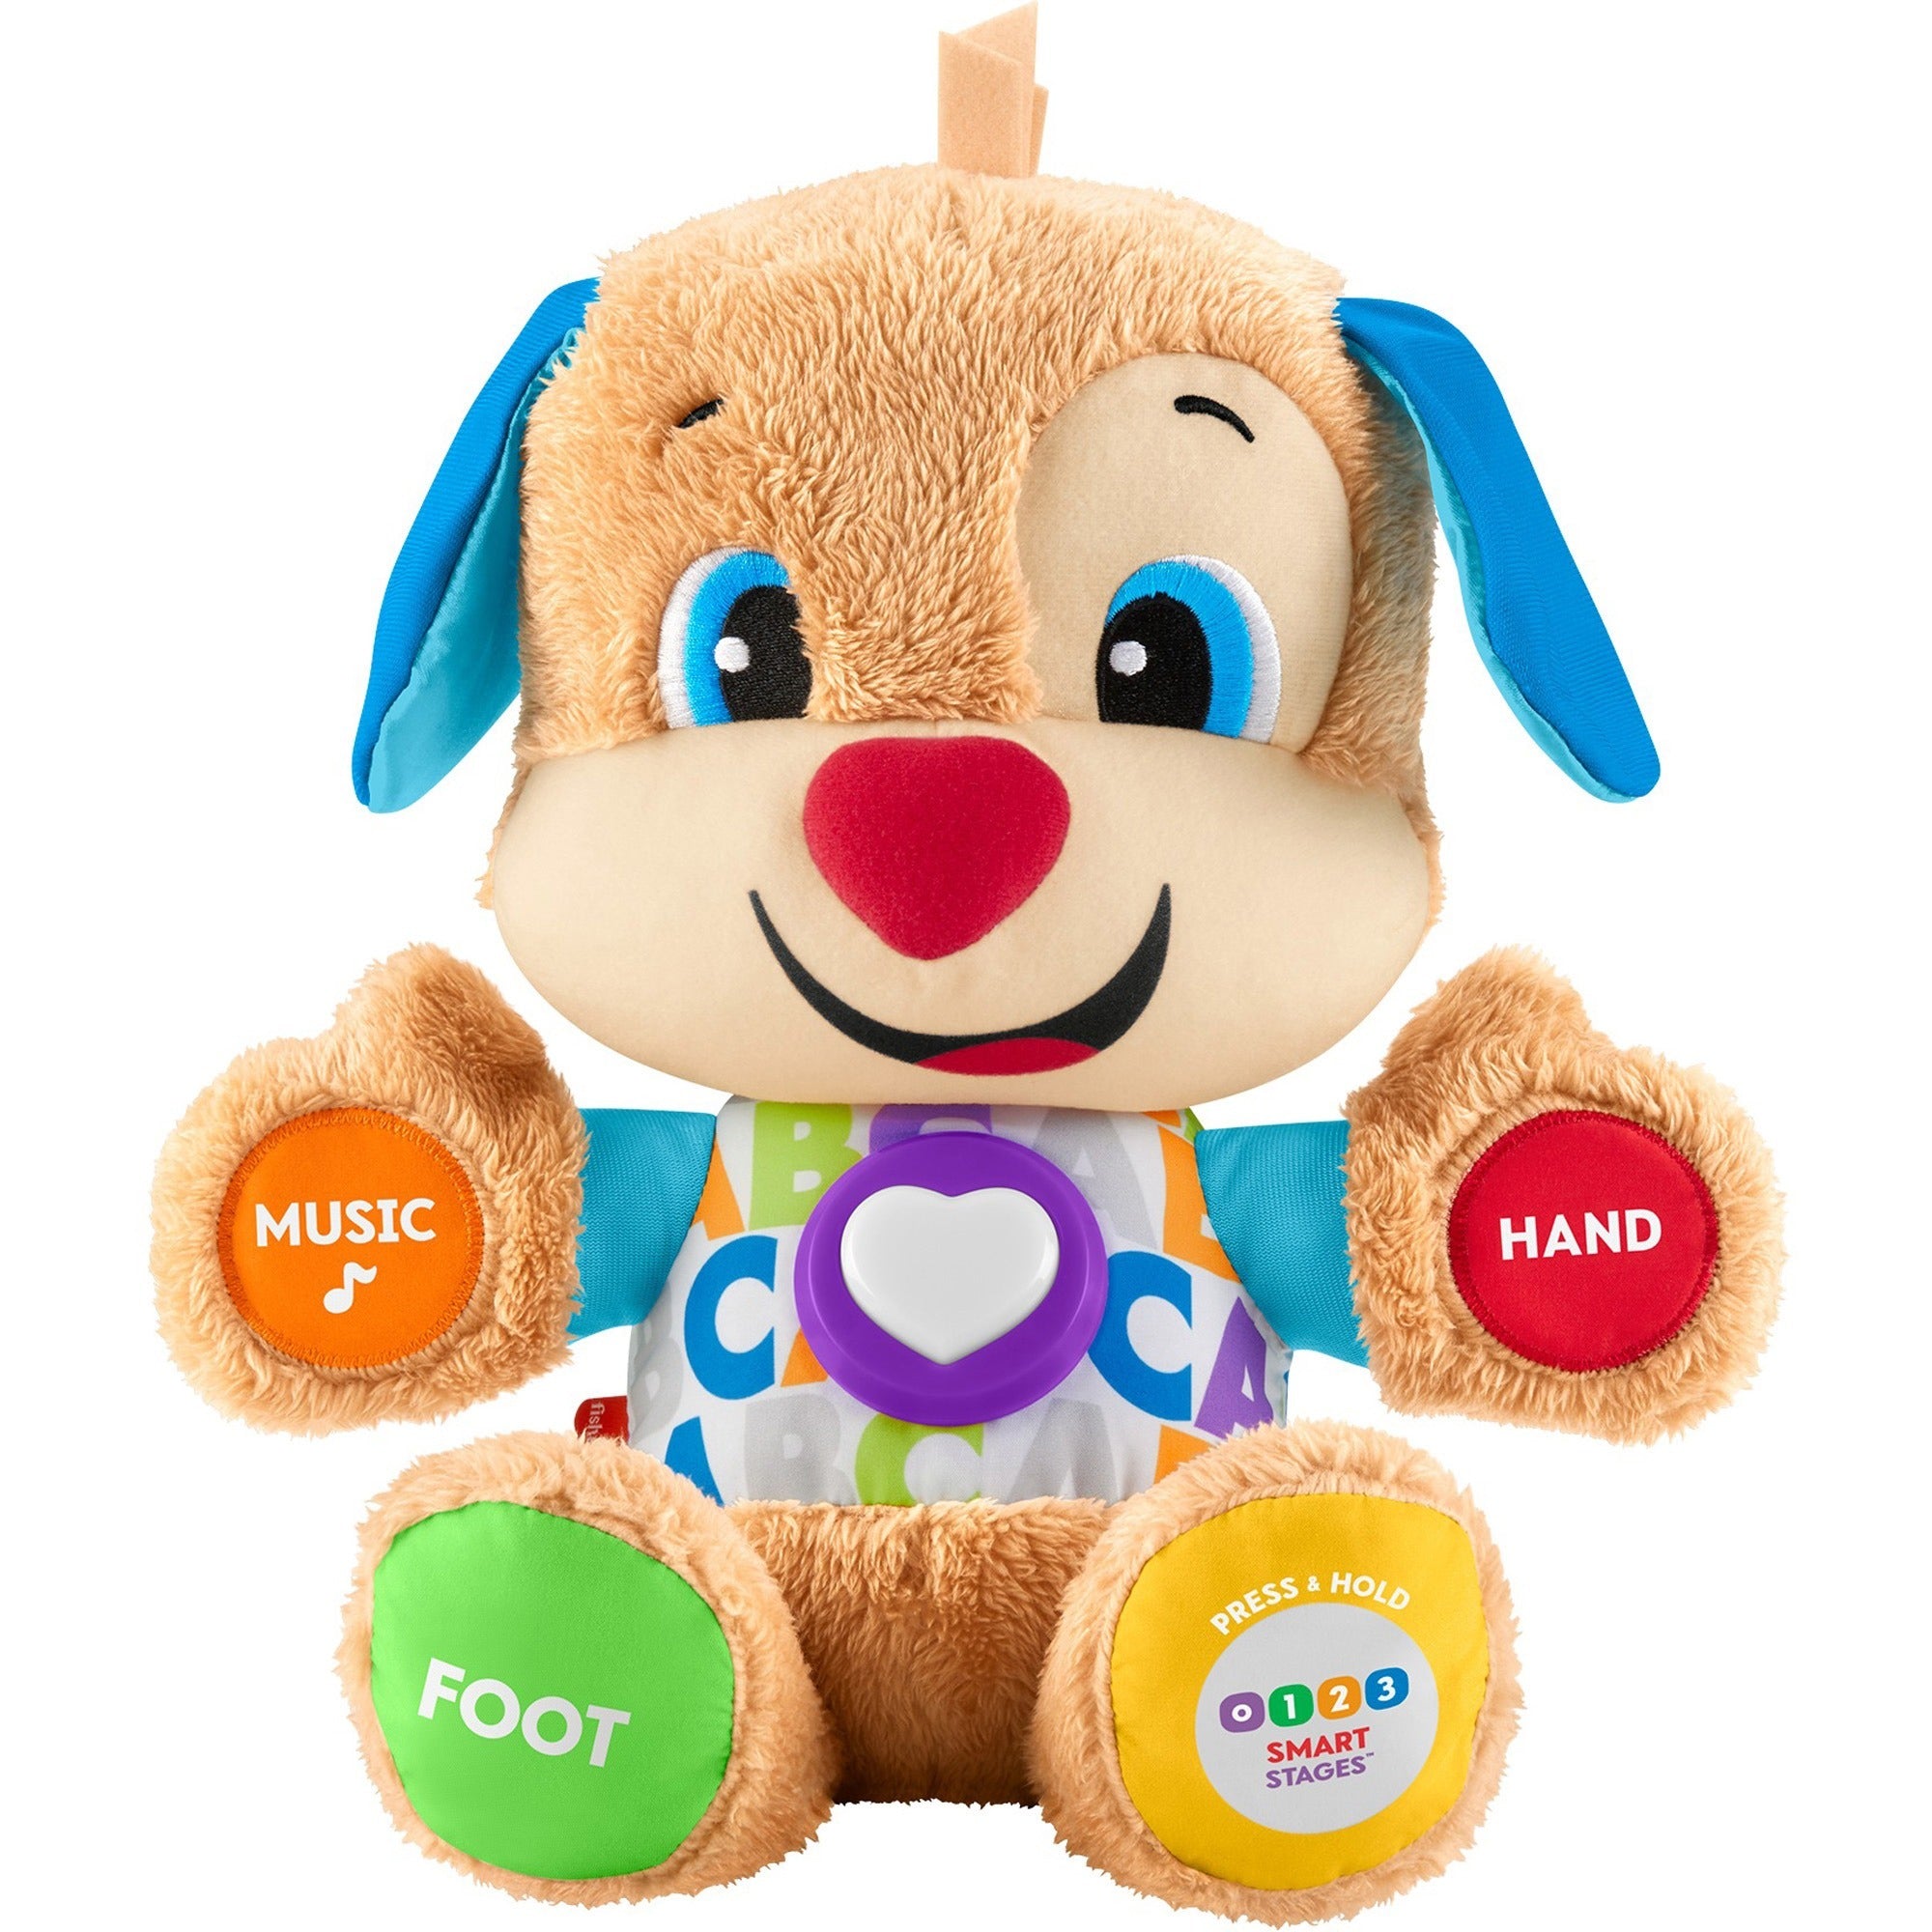 laugh-&-learn-smart-stages-puppy-theme-subject-animal-skill-learning-songs-phrase-alphabet-word-color-shape-physical-development-sound-music-exploration-parts-of-body-_fipfdf21 - 1